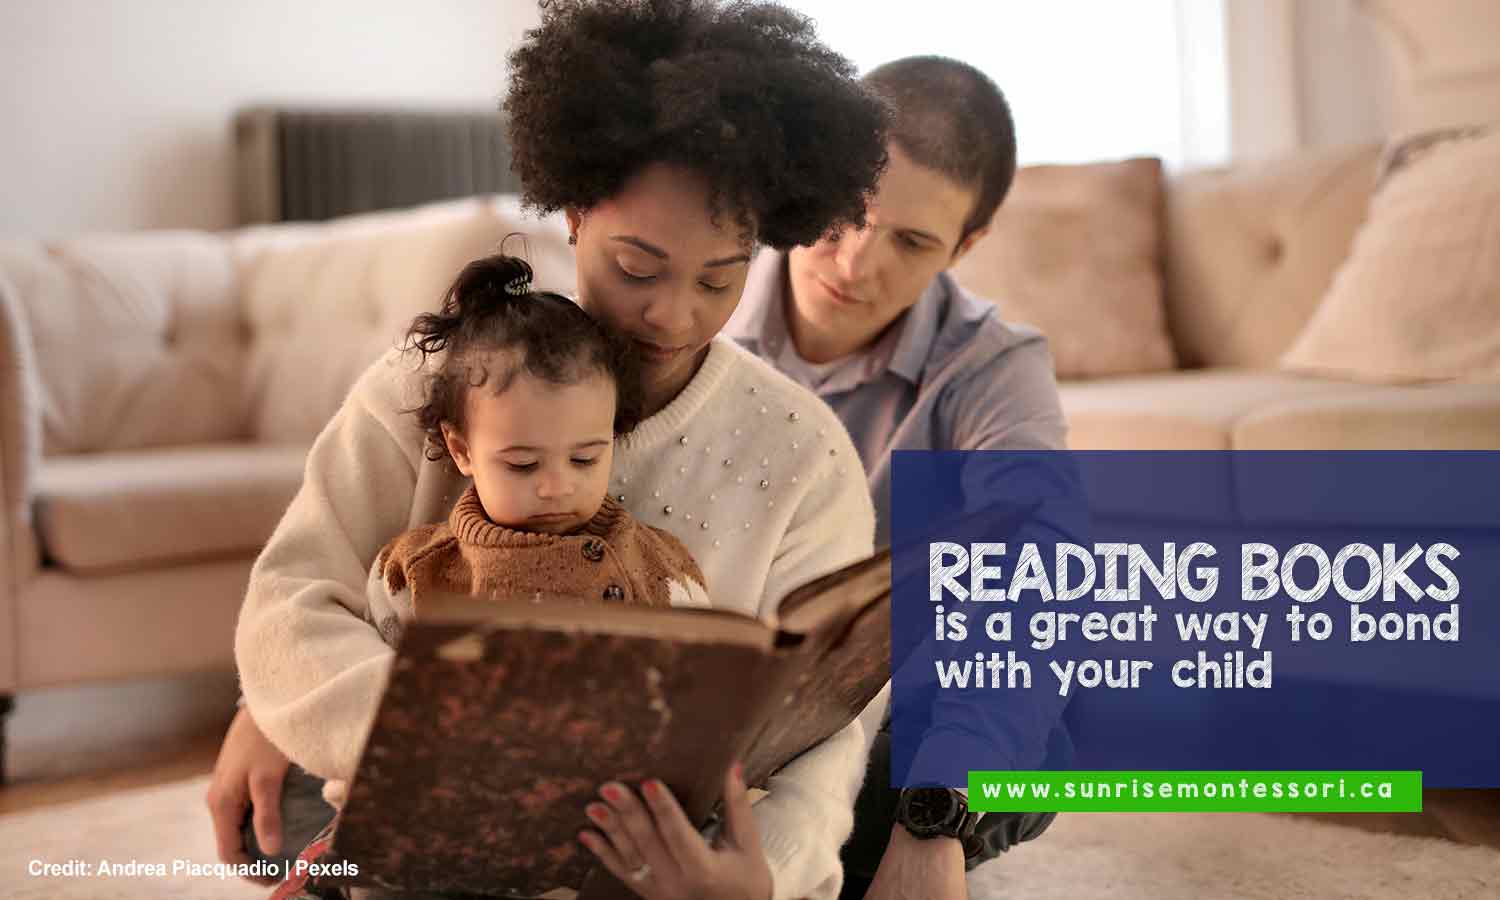 Reading books is a great way to bond with your child